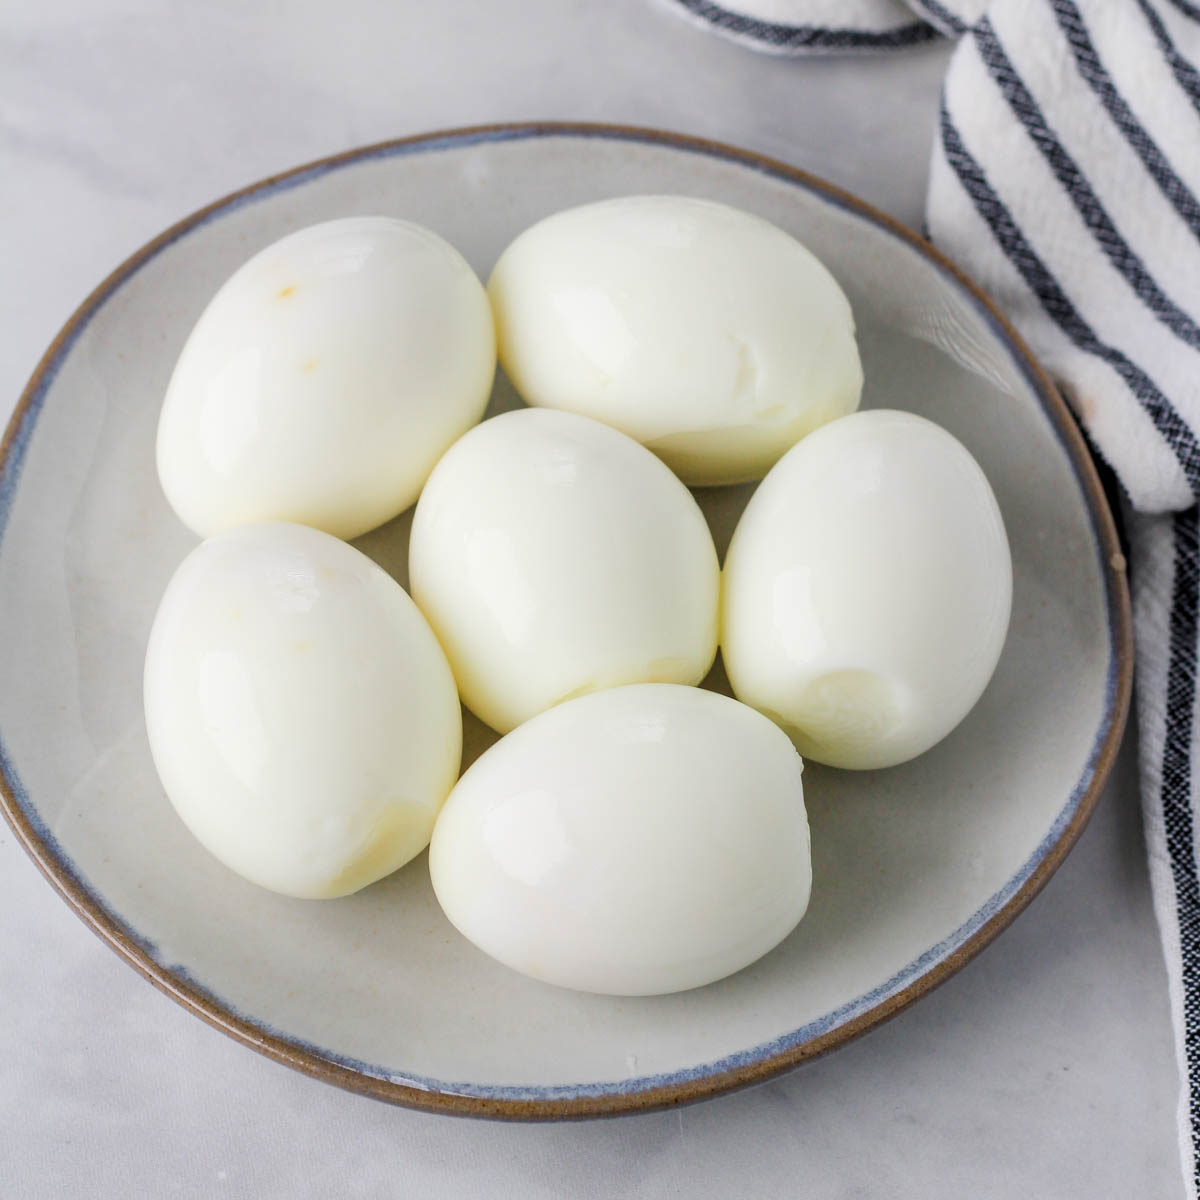 How to Hard Boiled Eggs